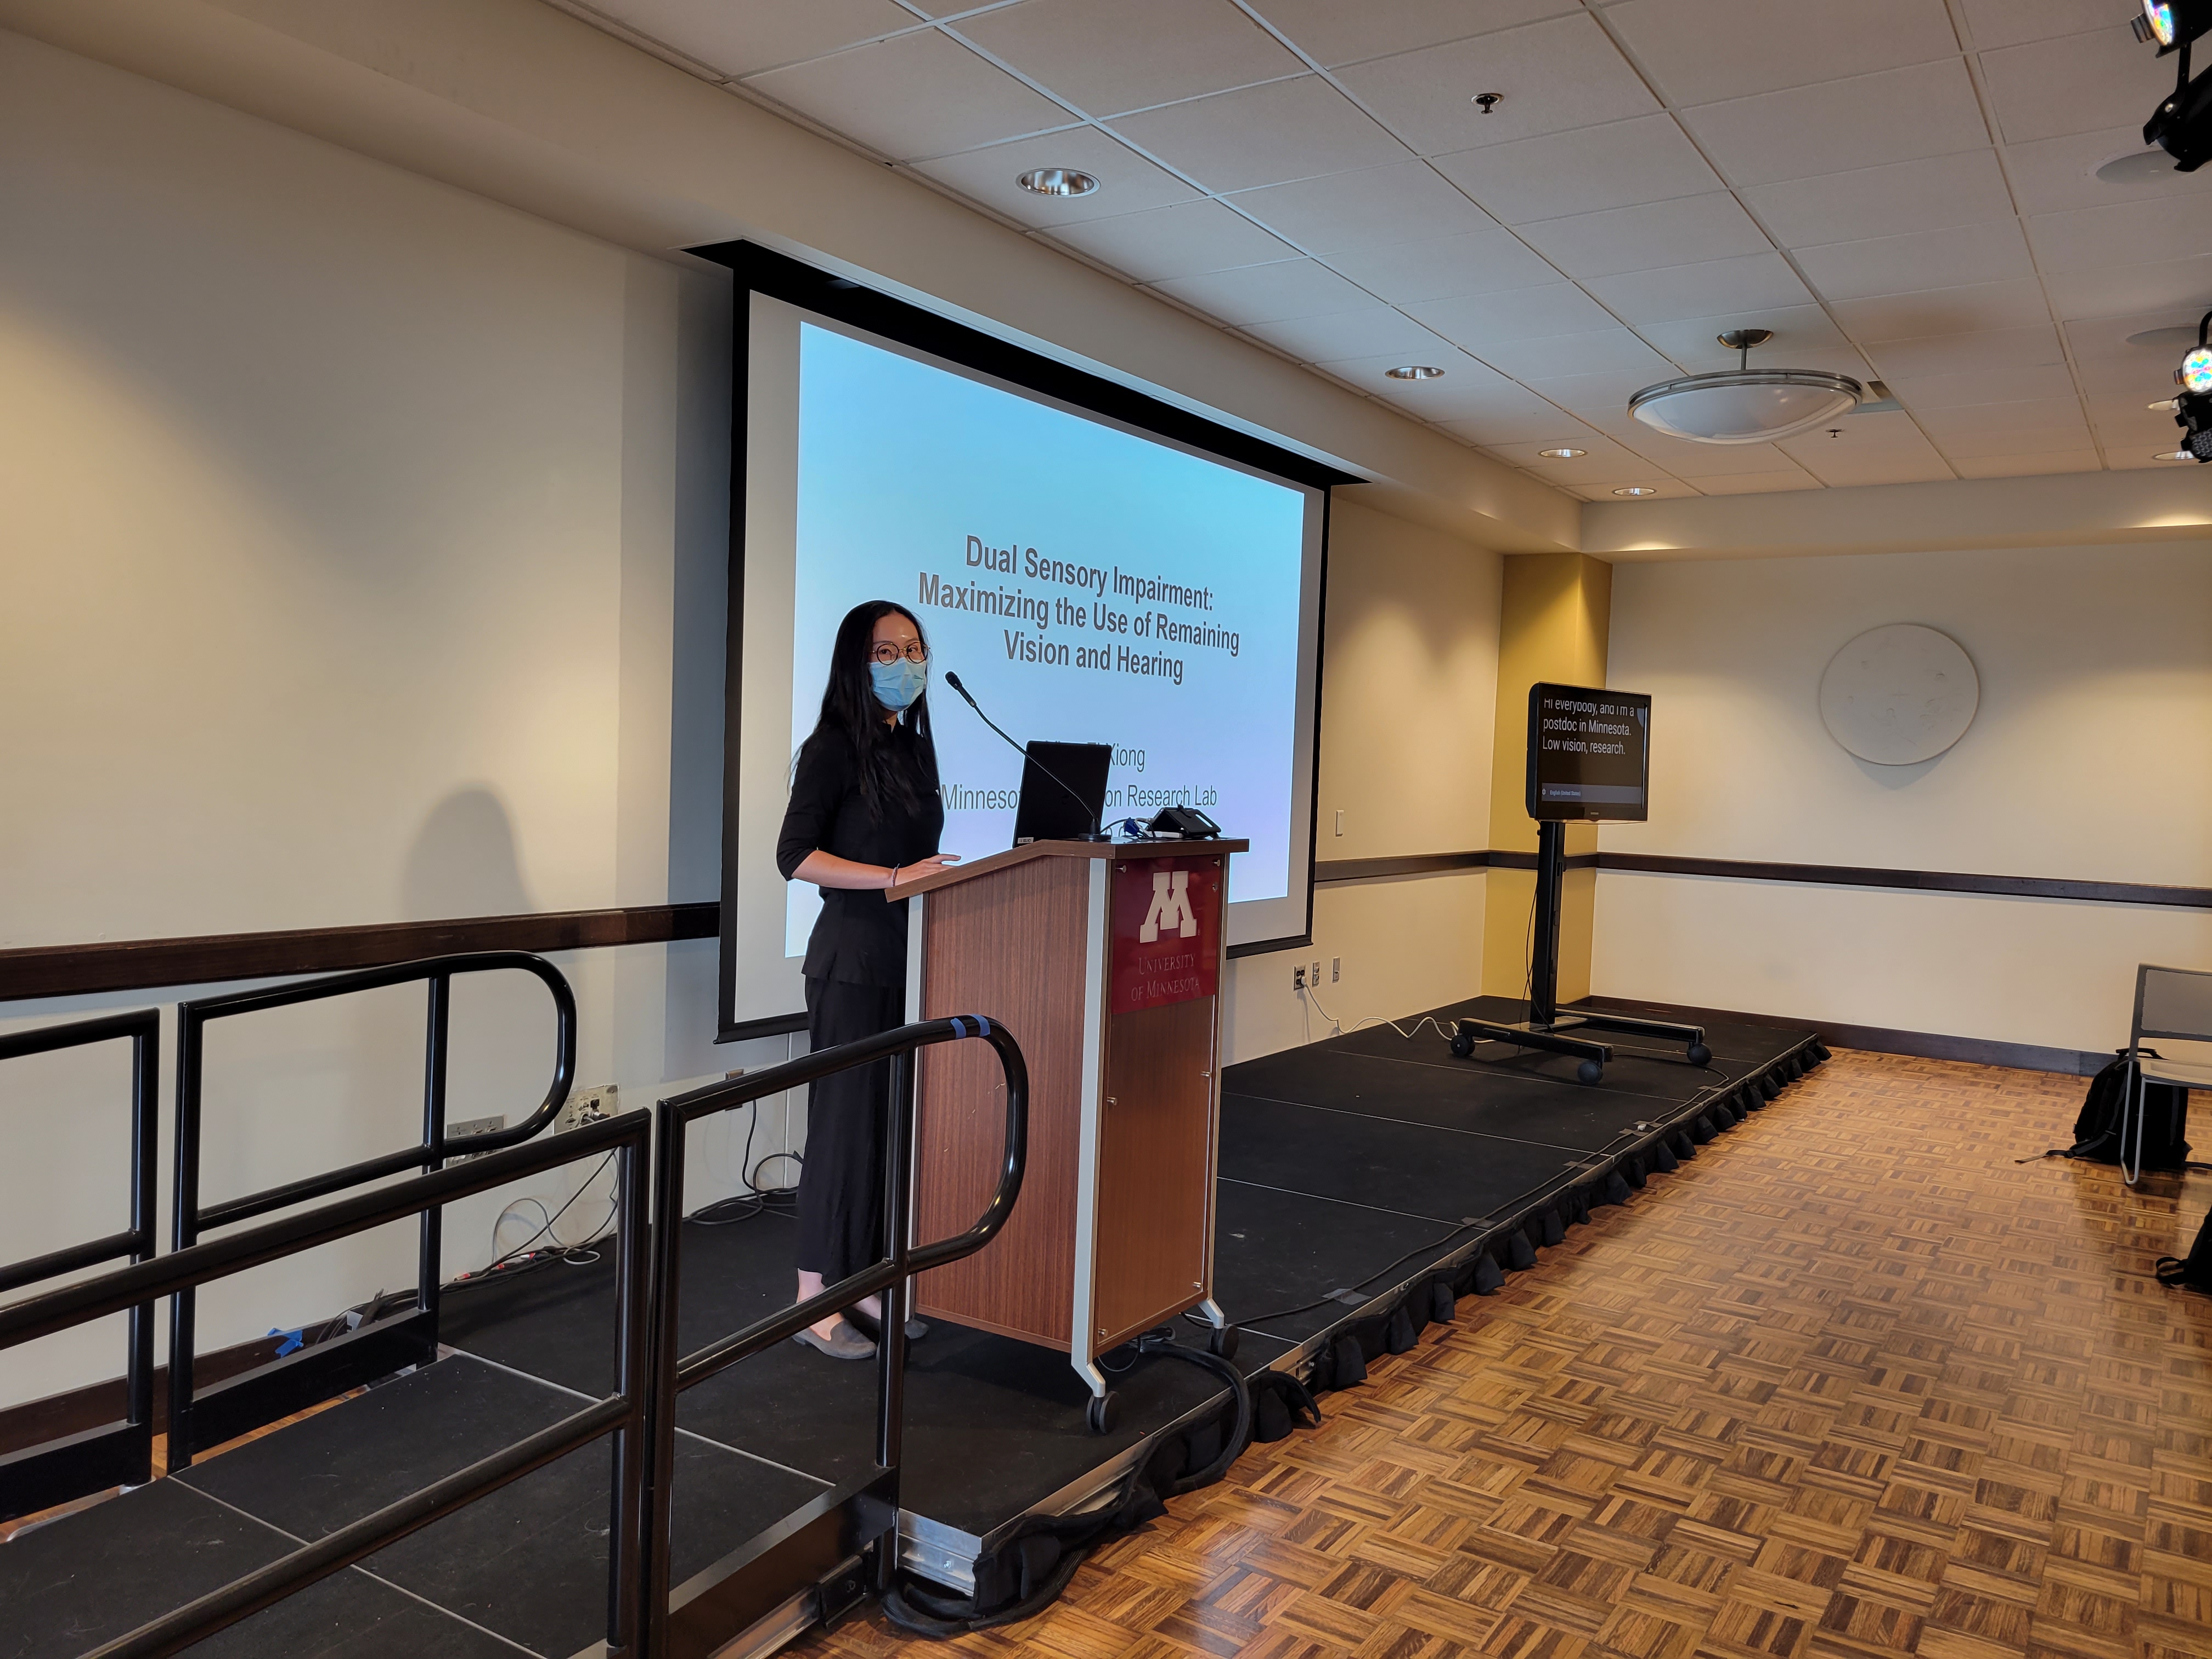 Ying-Zi wearing all black, standing at a podium with her slide presentation behind her on her right.